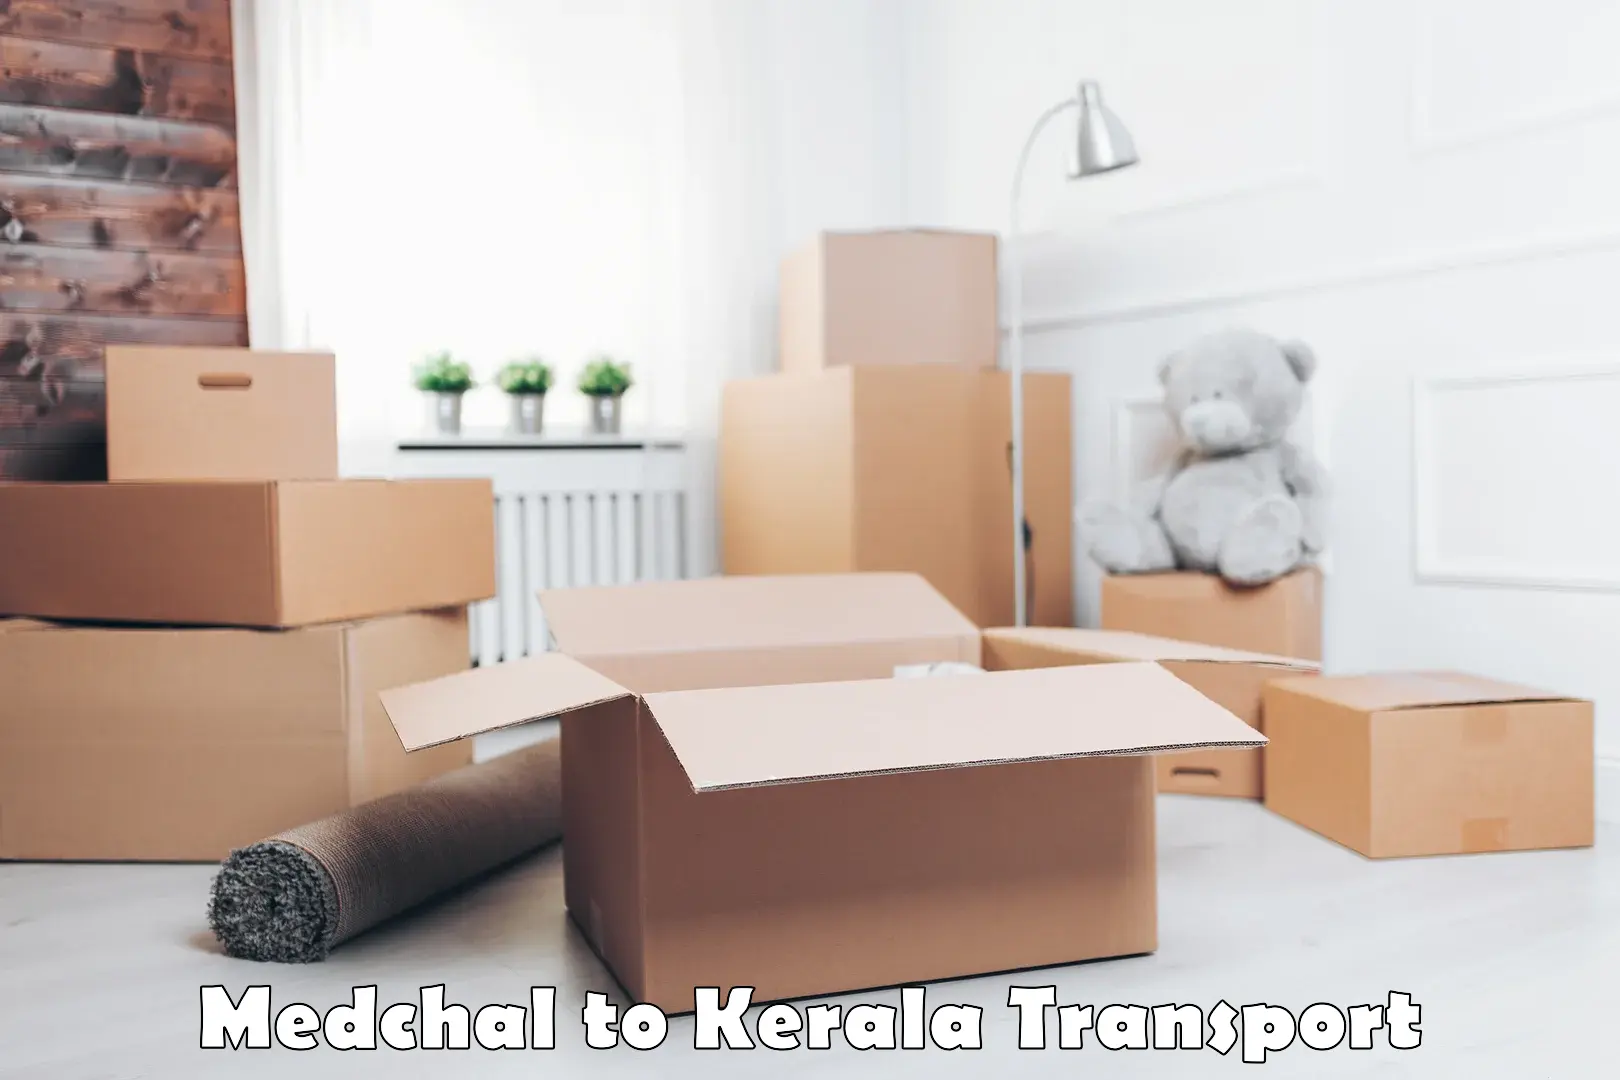 Transport shared services Medchal to Kothamangalam